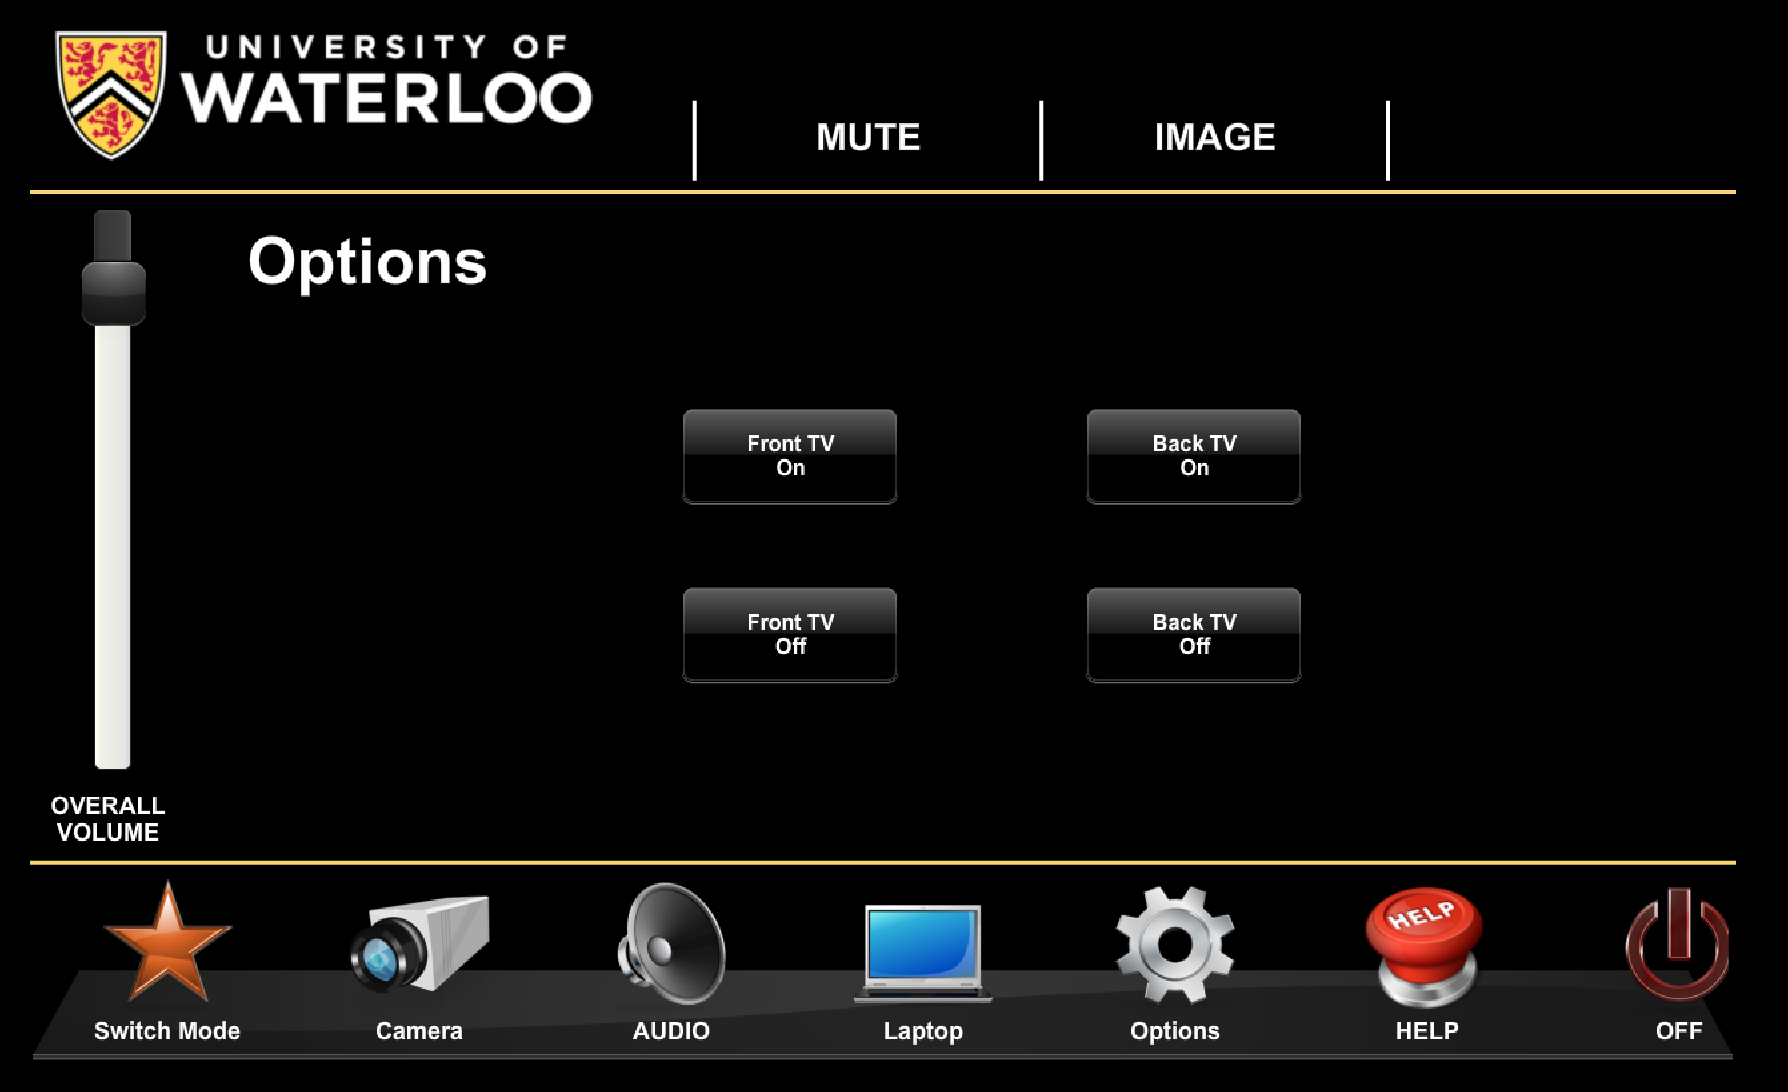 Image of control panel with options for turning TV screens on and off